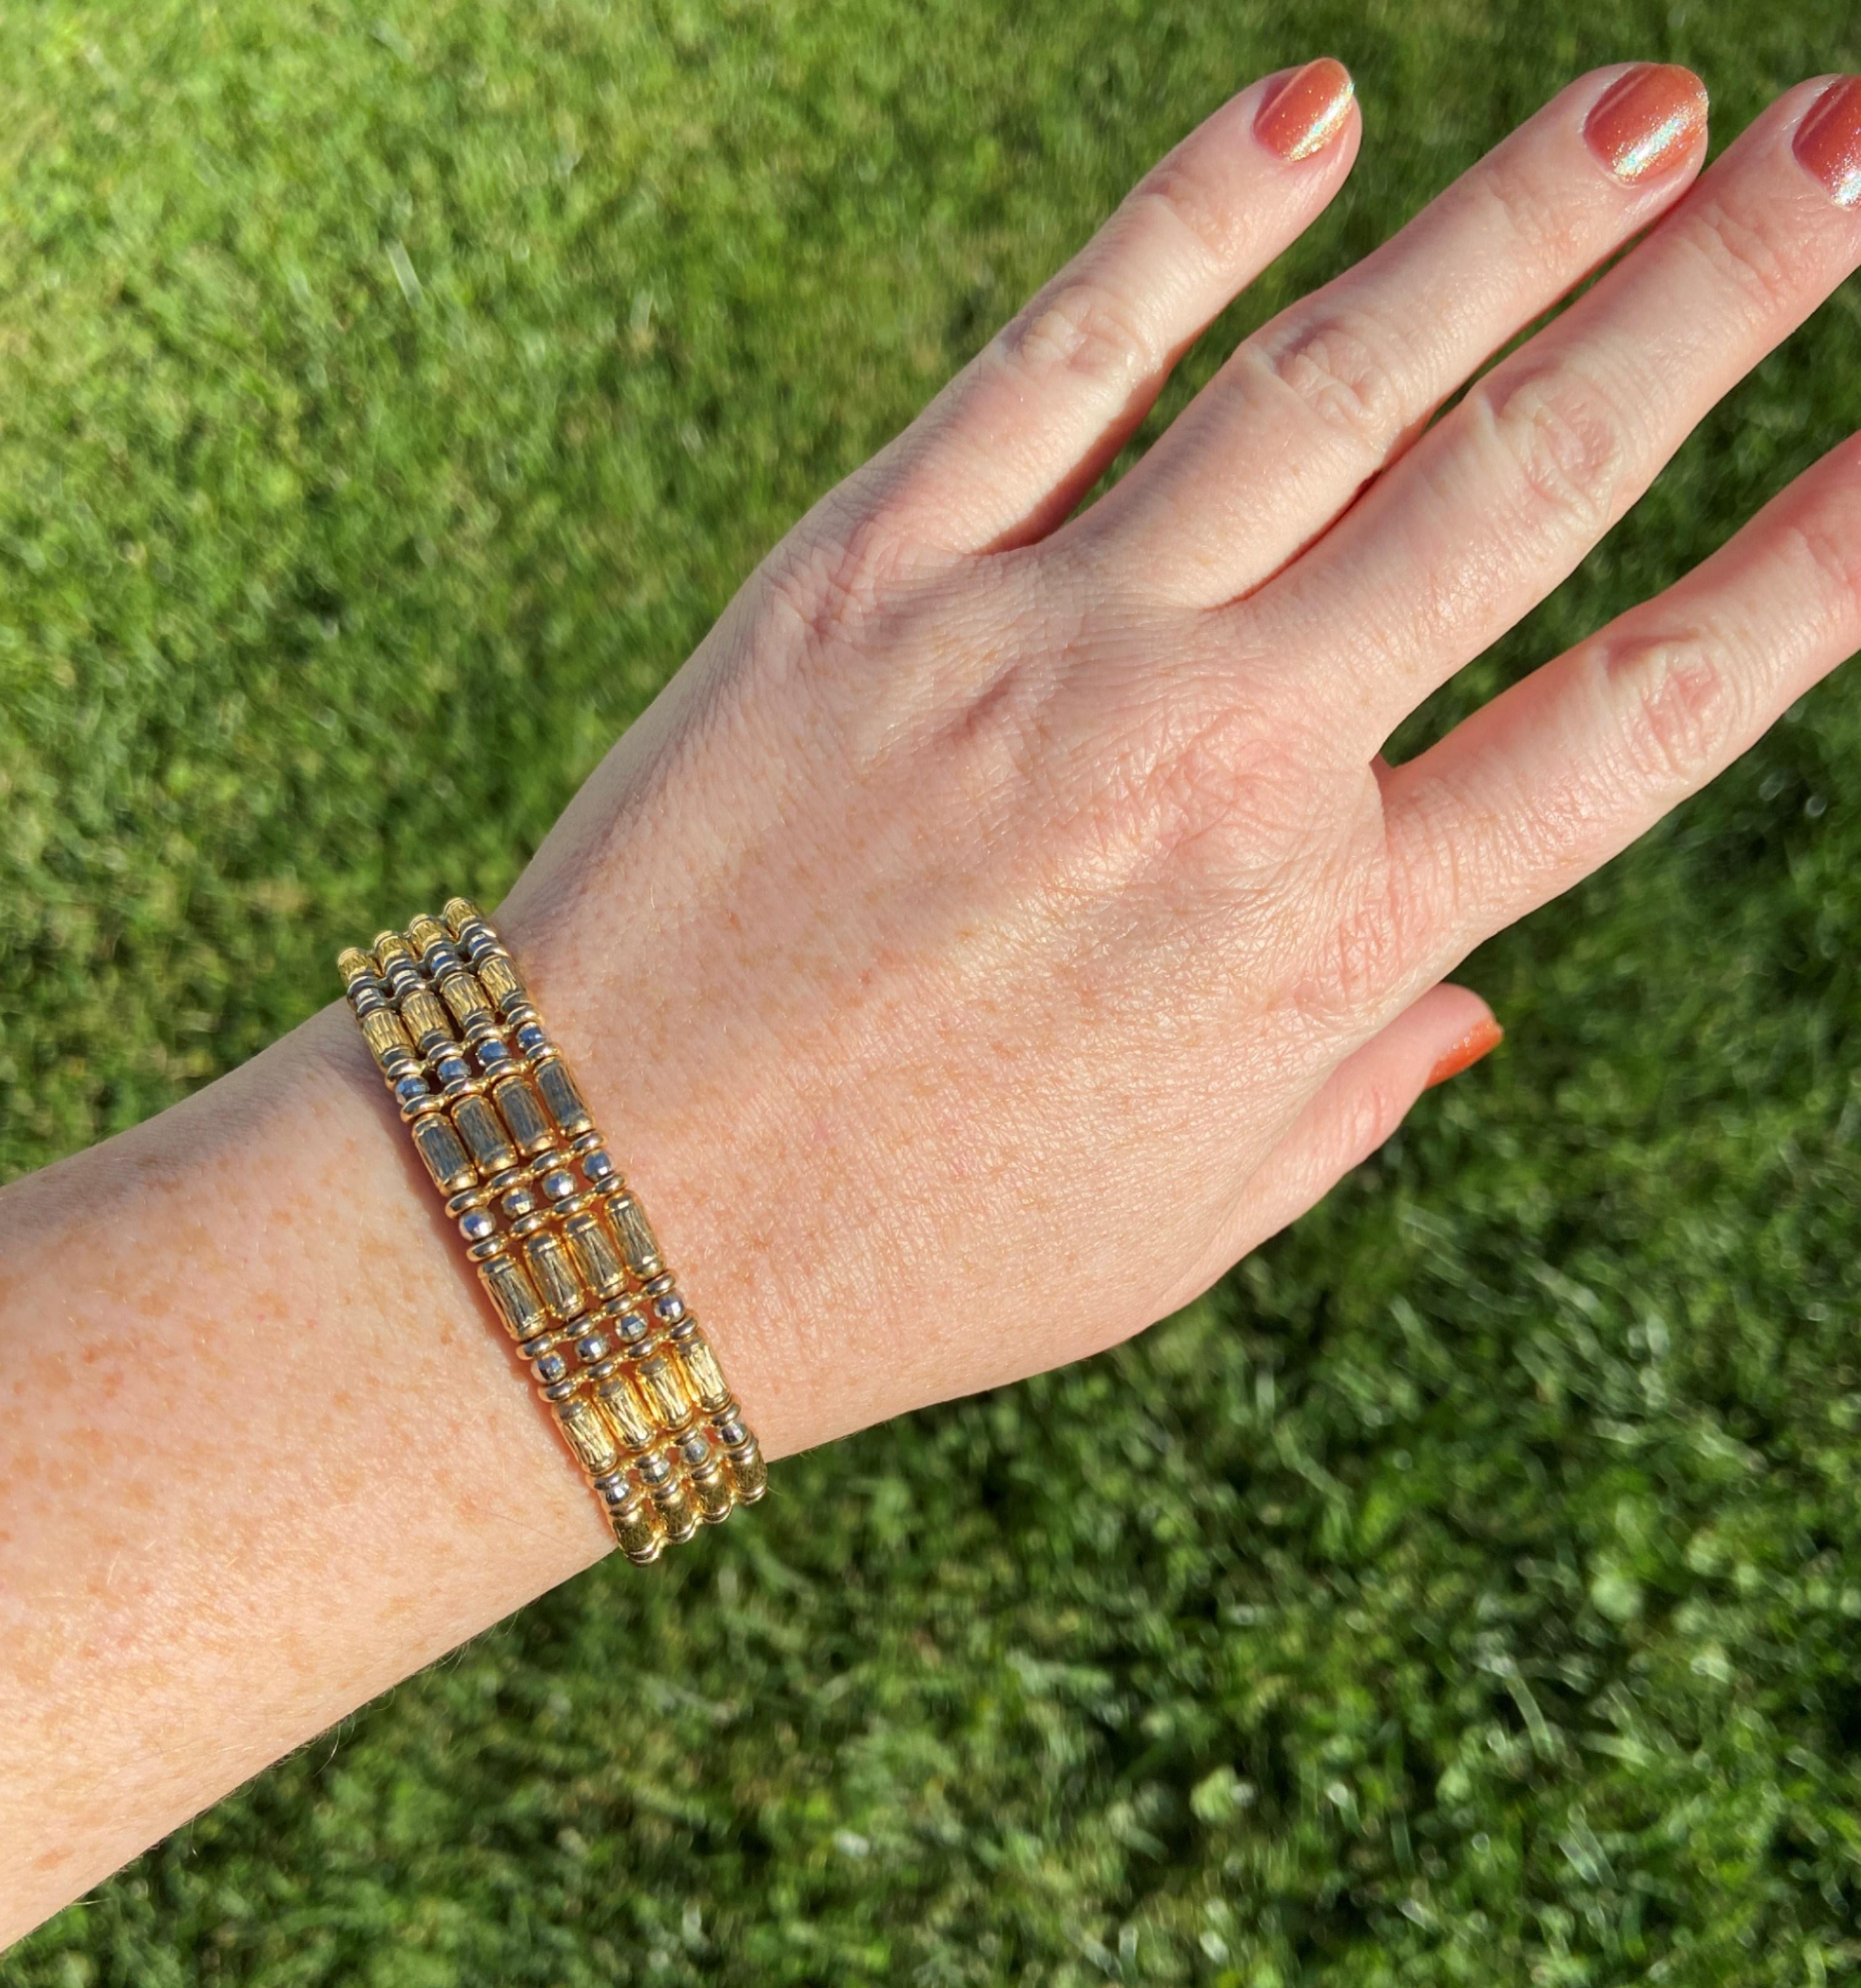 14kt yellow and white gold cuff featuring four rows of textured and faceted beads. The cuff is flexible with an approximate circumference of 7.5 inches. The cuff measures approximately 14.1 mm wide. 

Stamped 